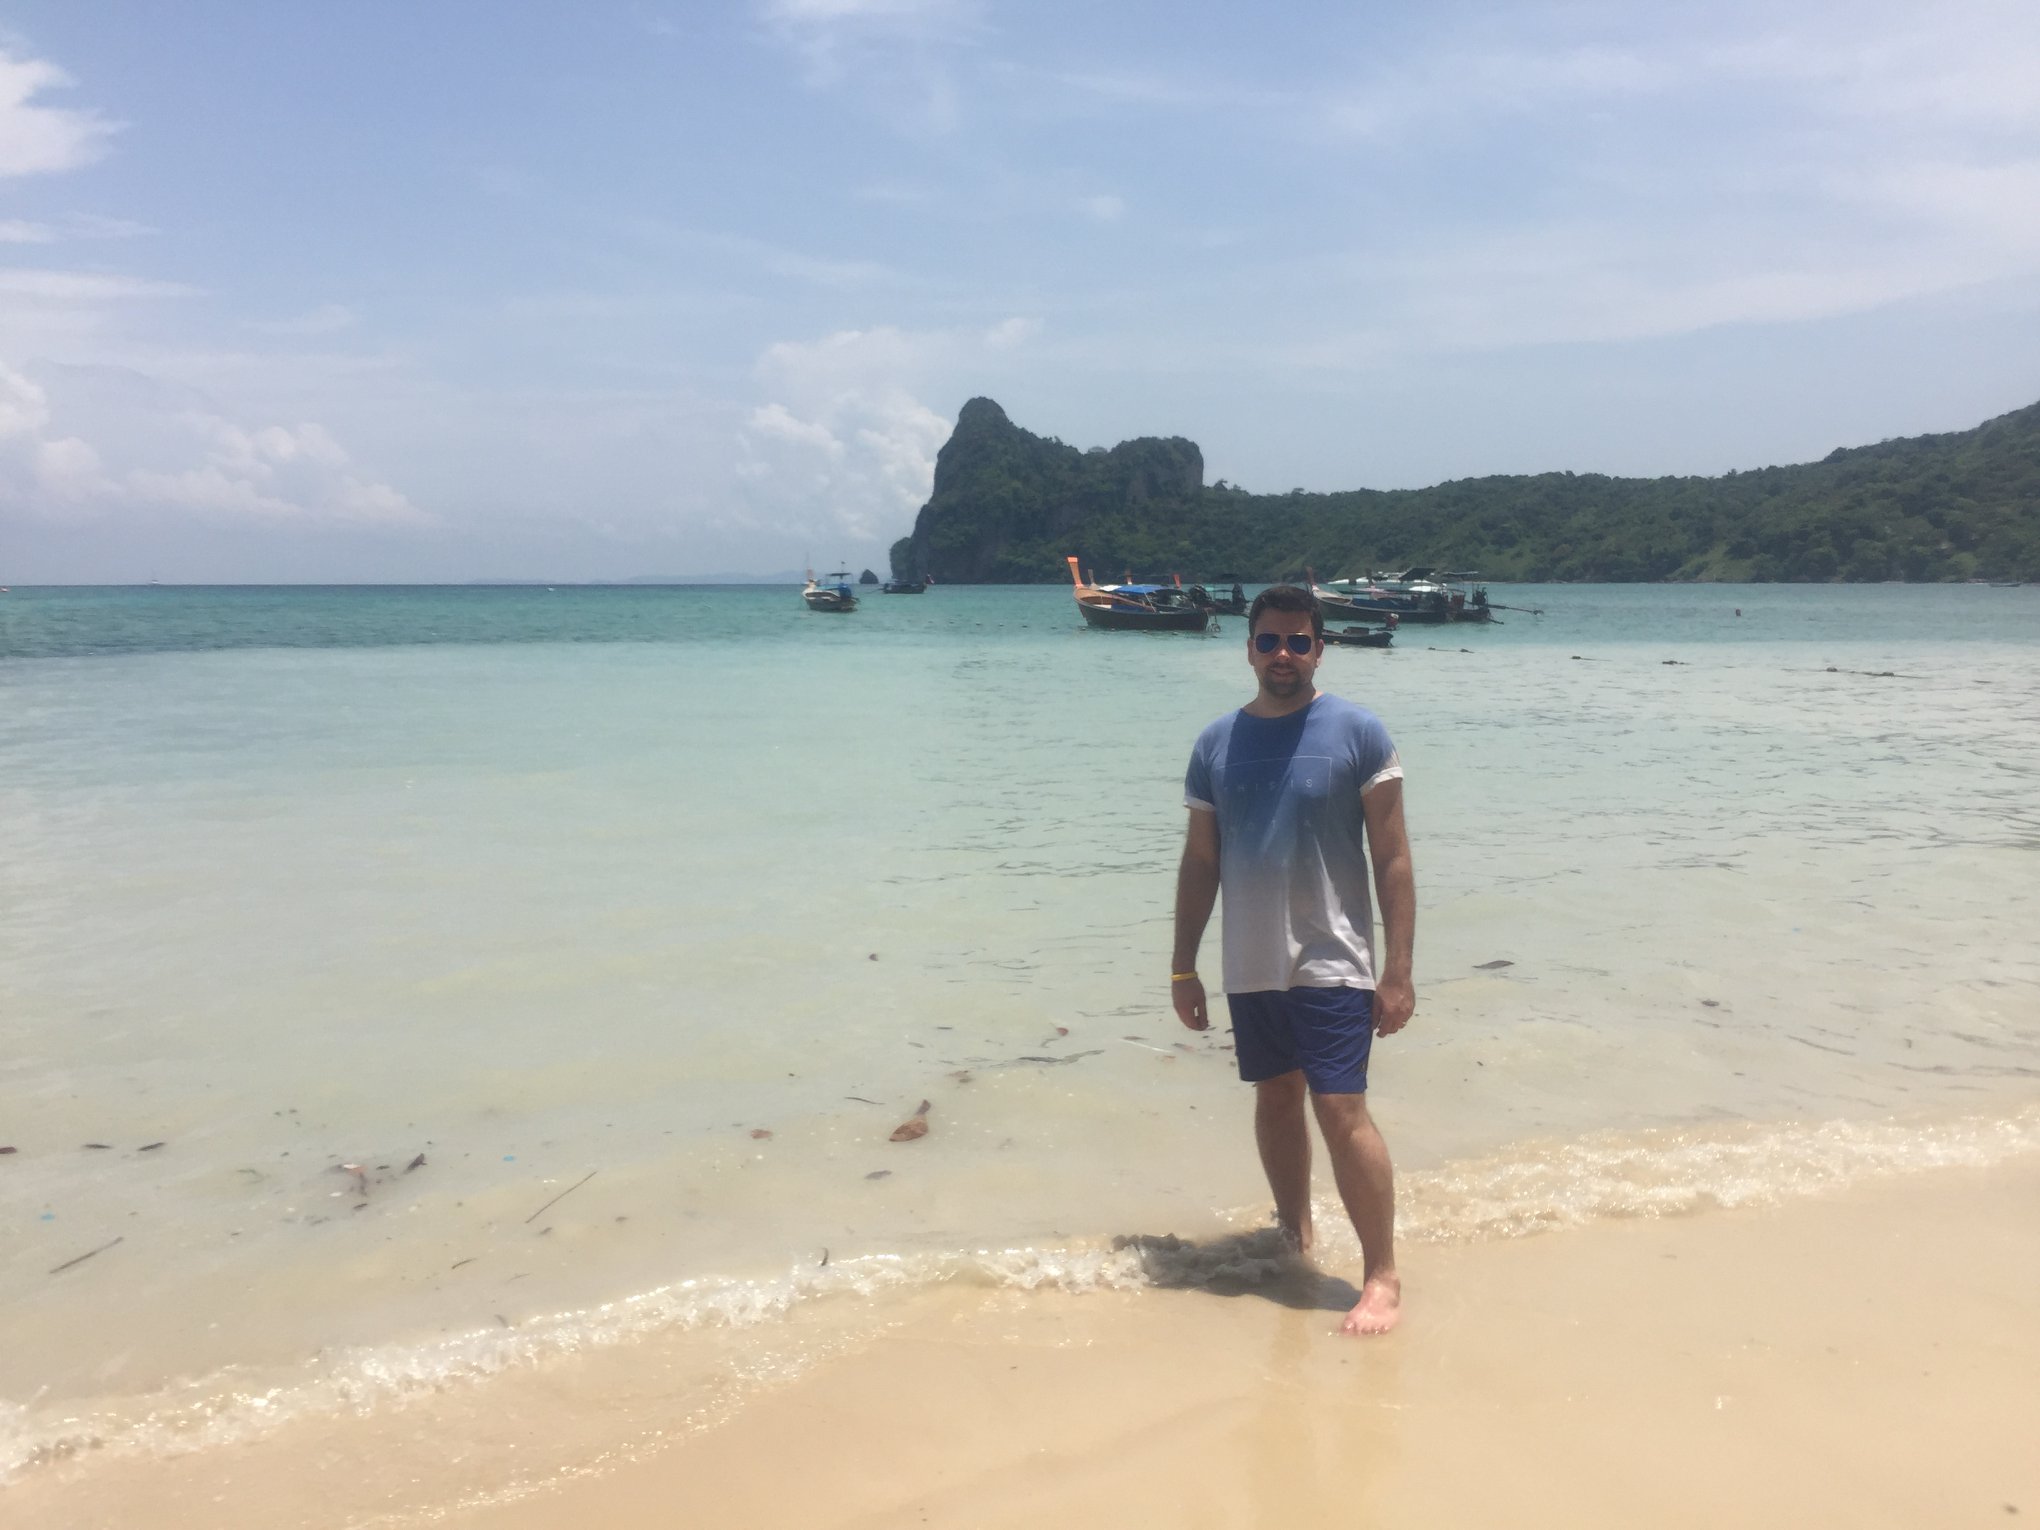 Travelling makes memories and also travelling helps overcome depression. John founder of seek a therapy in thailand